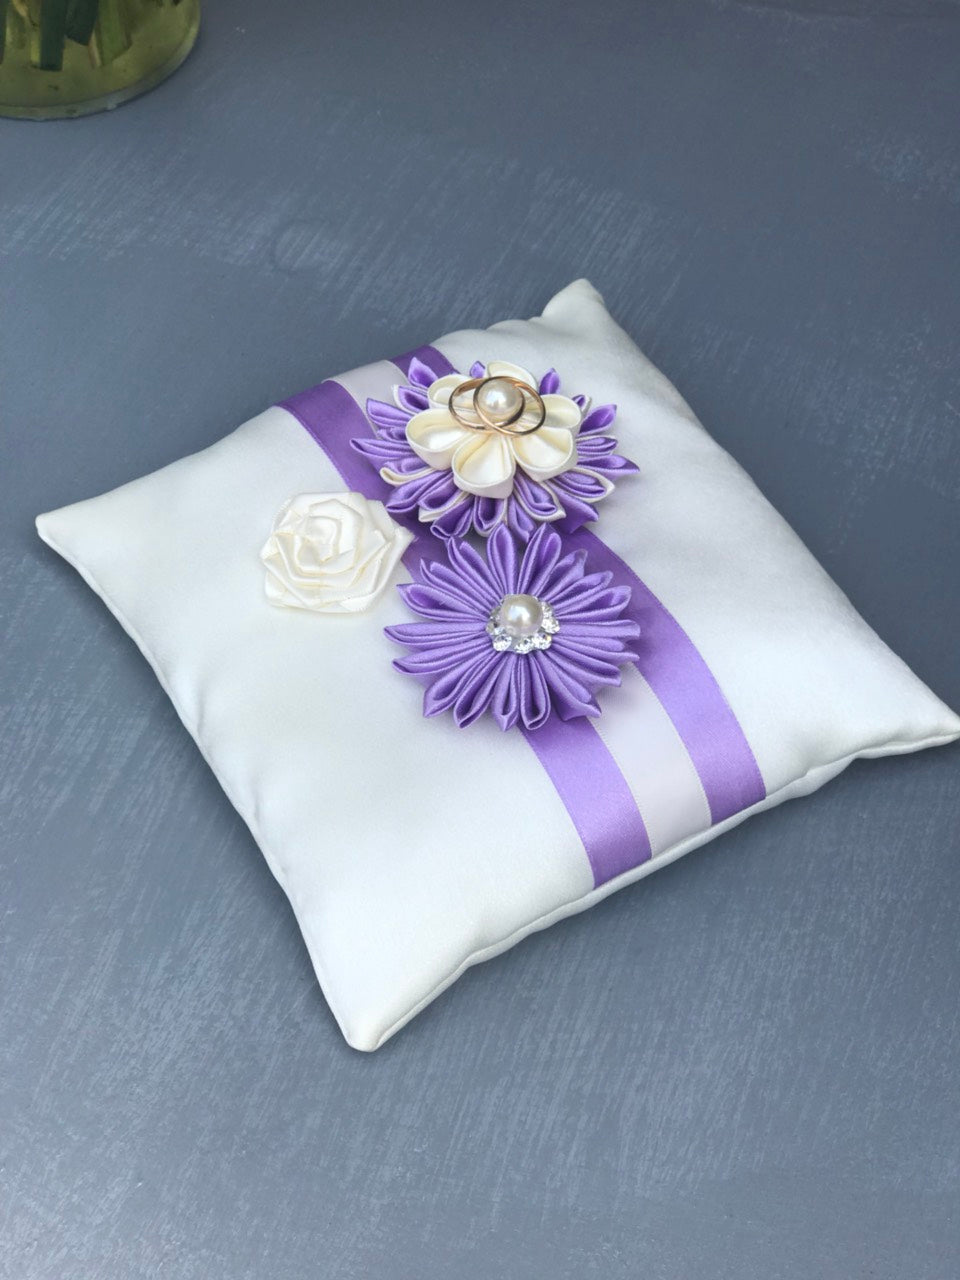 Support Cushion Ring Pillow Bearer Cushions For Lover Friend Good Gift  Party Decoration Flowers Romantic Decor Pallet - Walmart.com